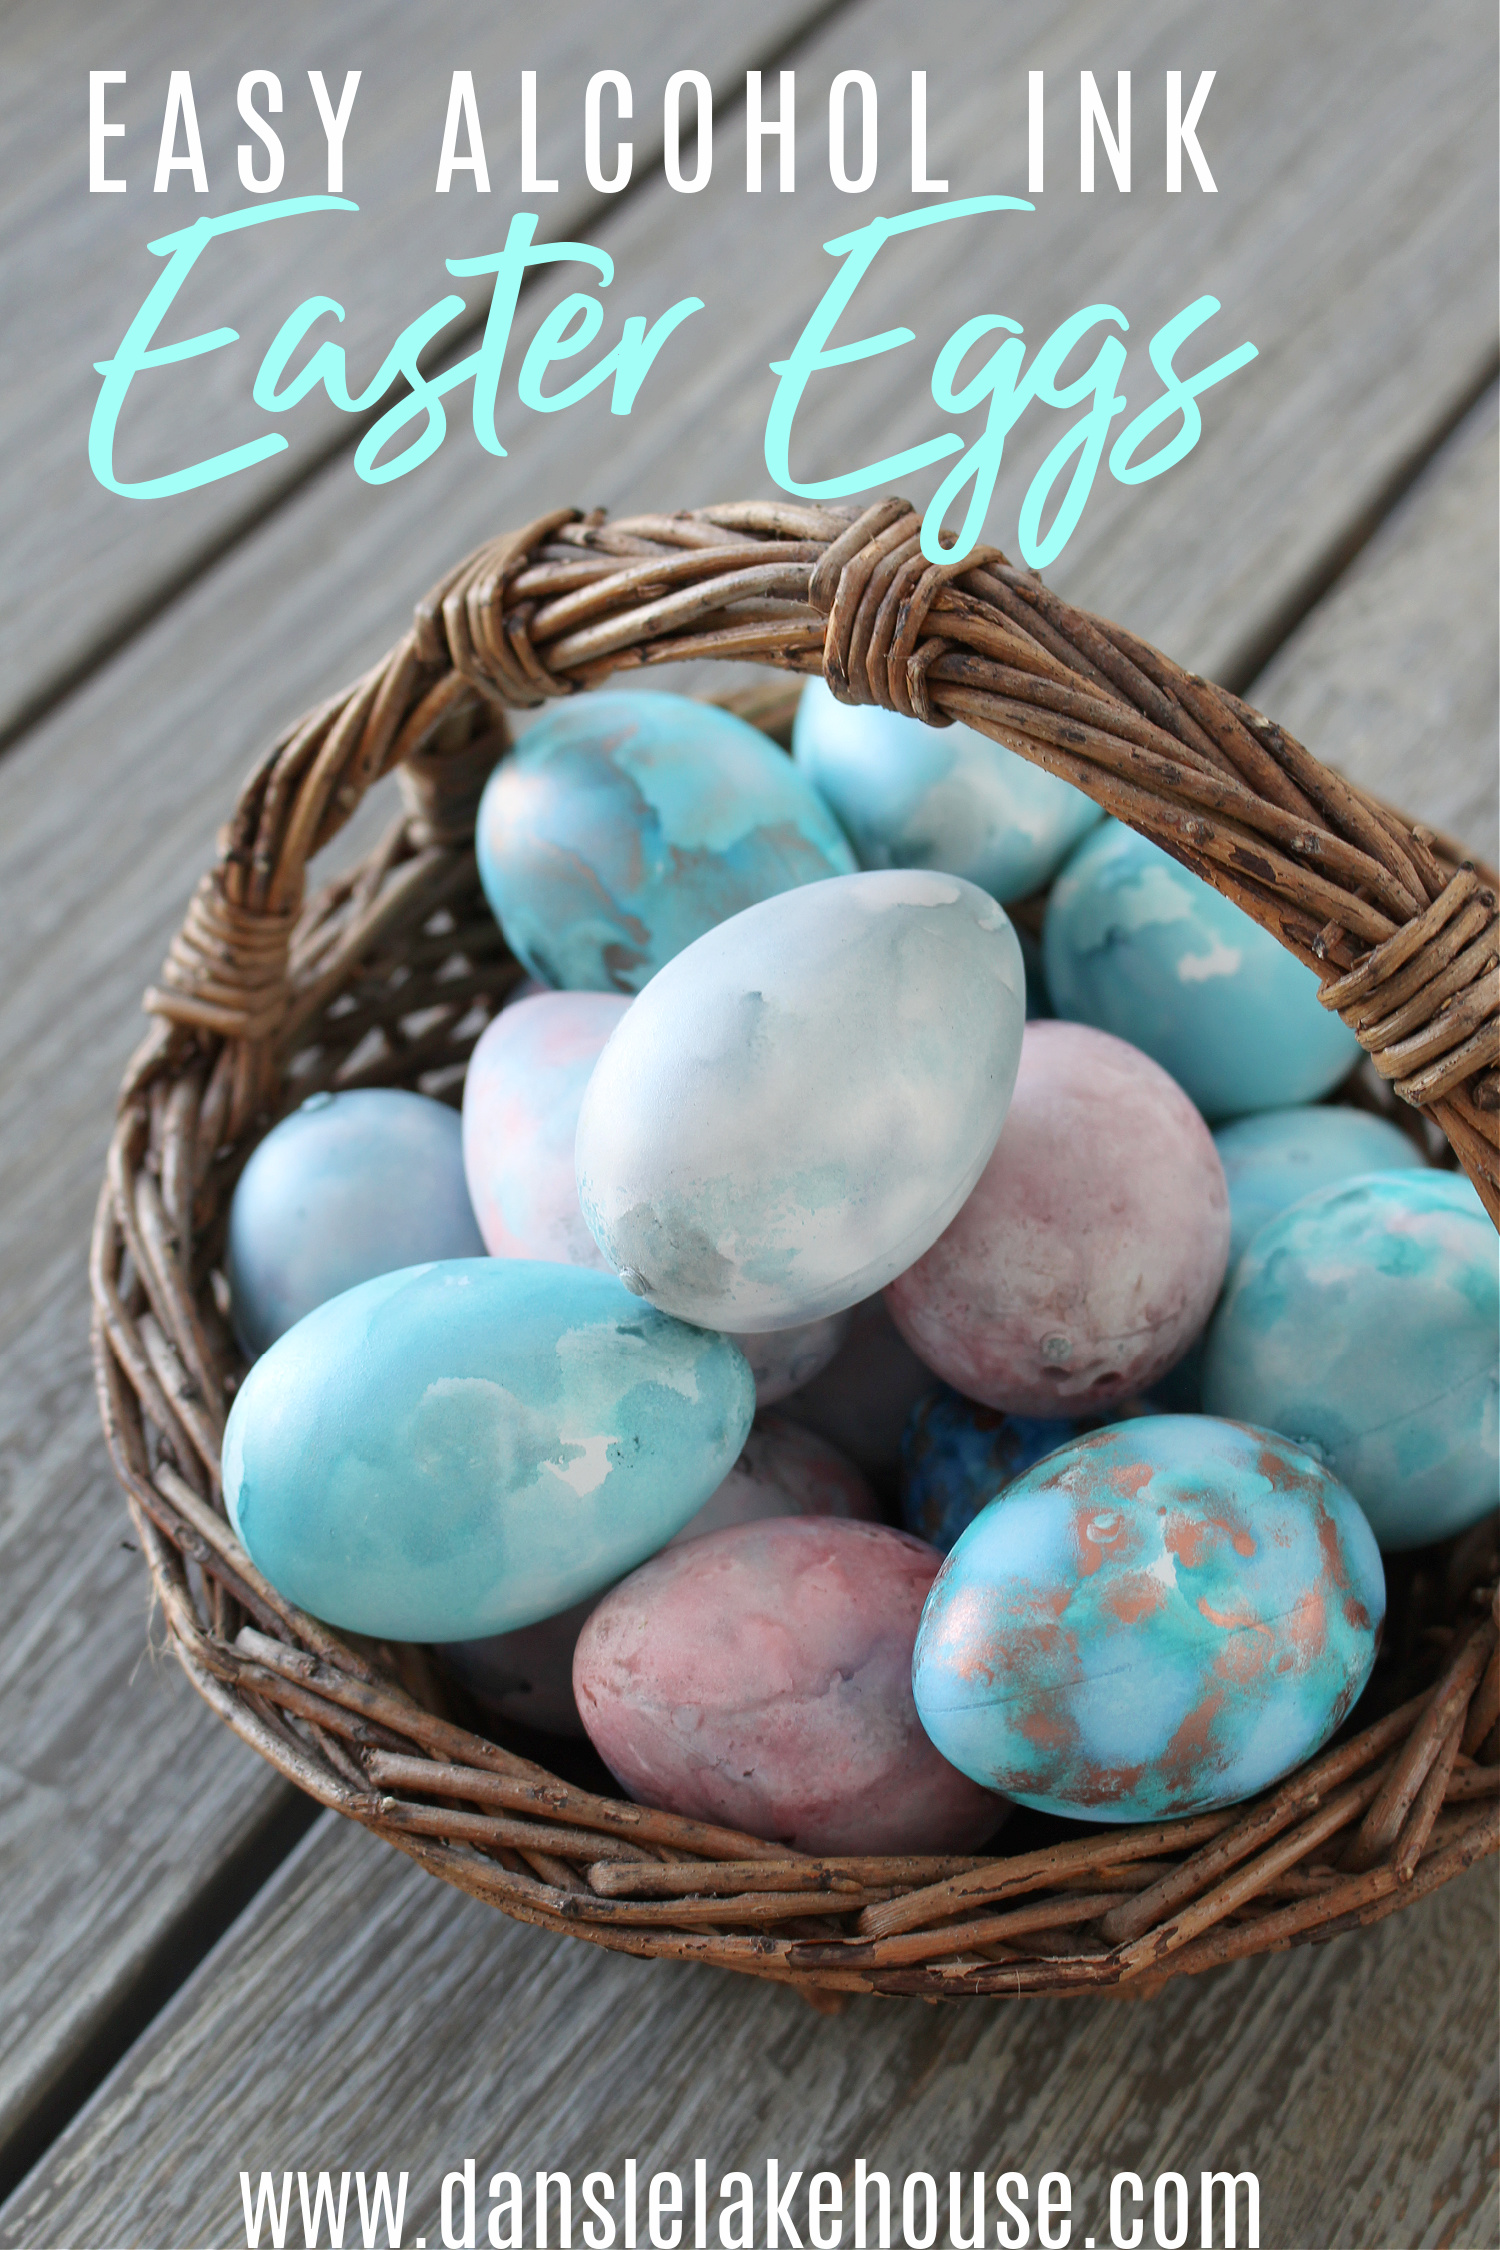 How to Make Alcohol Ink Easter Eggs